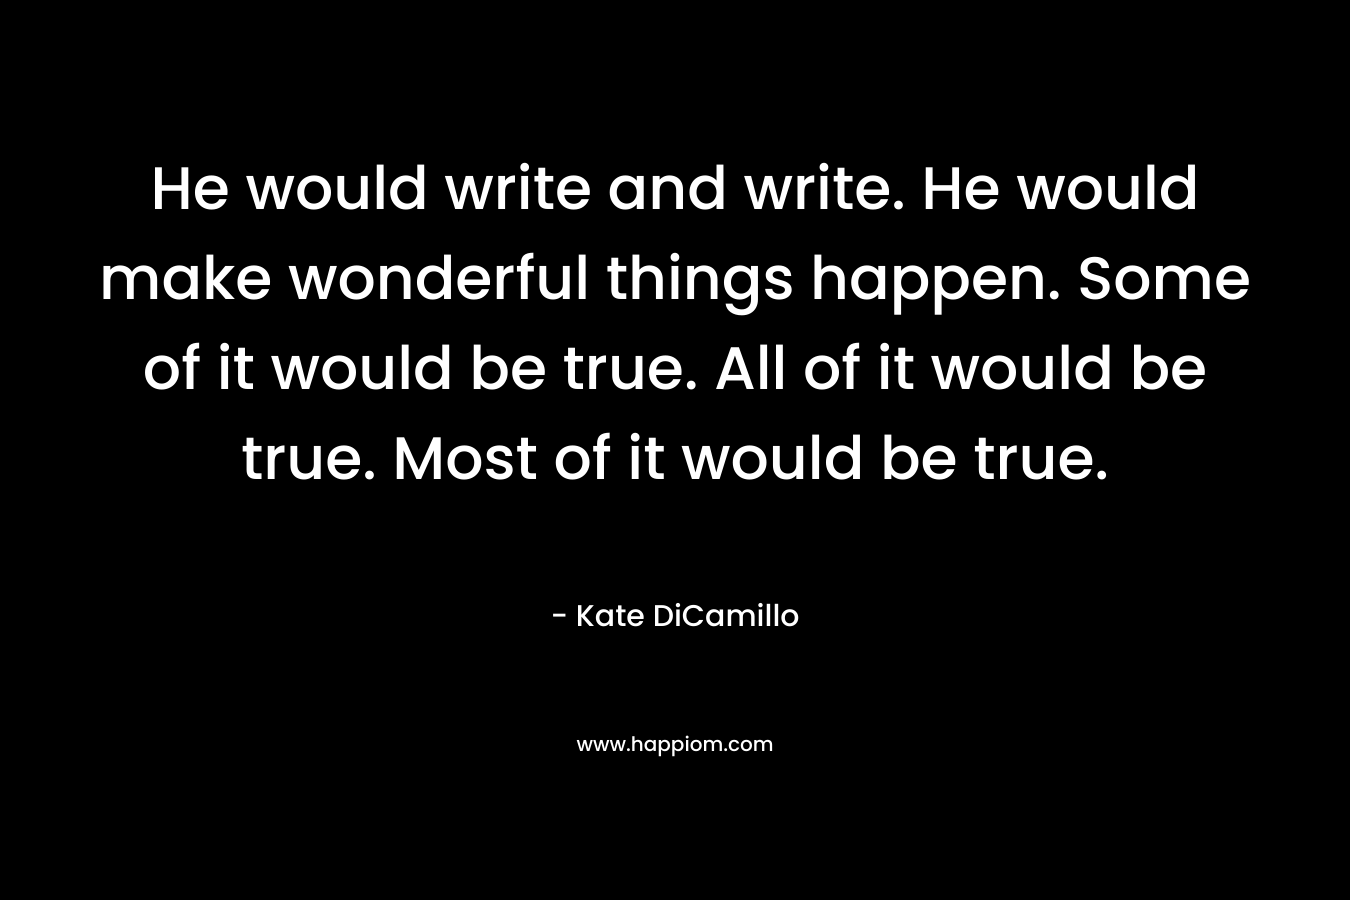 He would write and write. He would make wonderful things happen. Some of it would be true. All of it would be true. Most of it would be true. – Kate DiCamillo